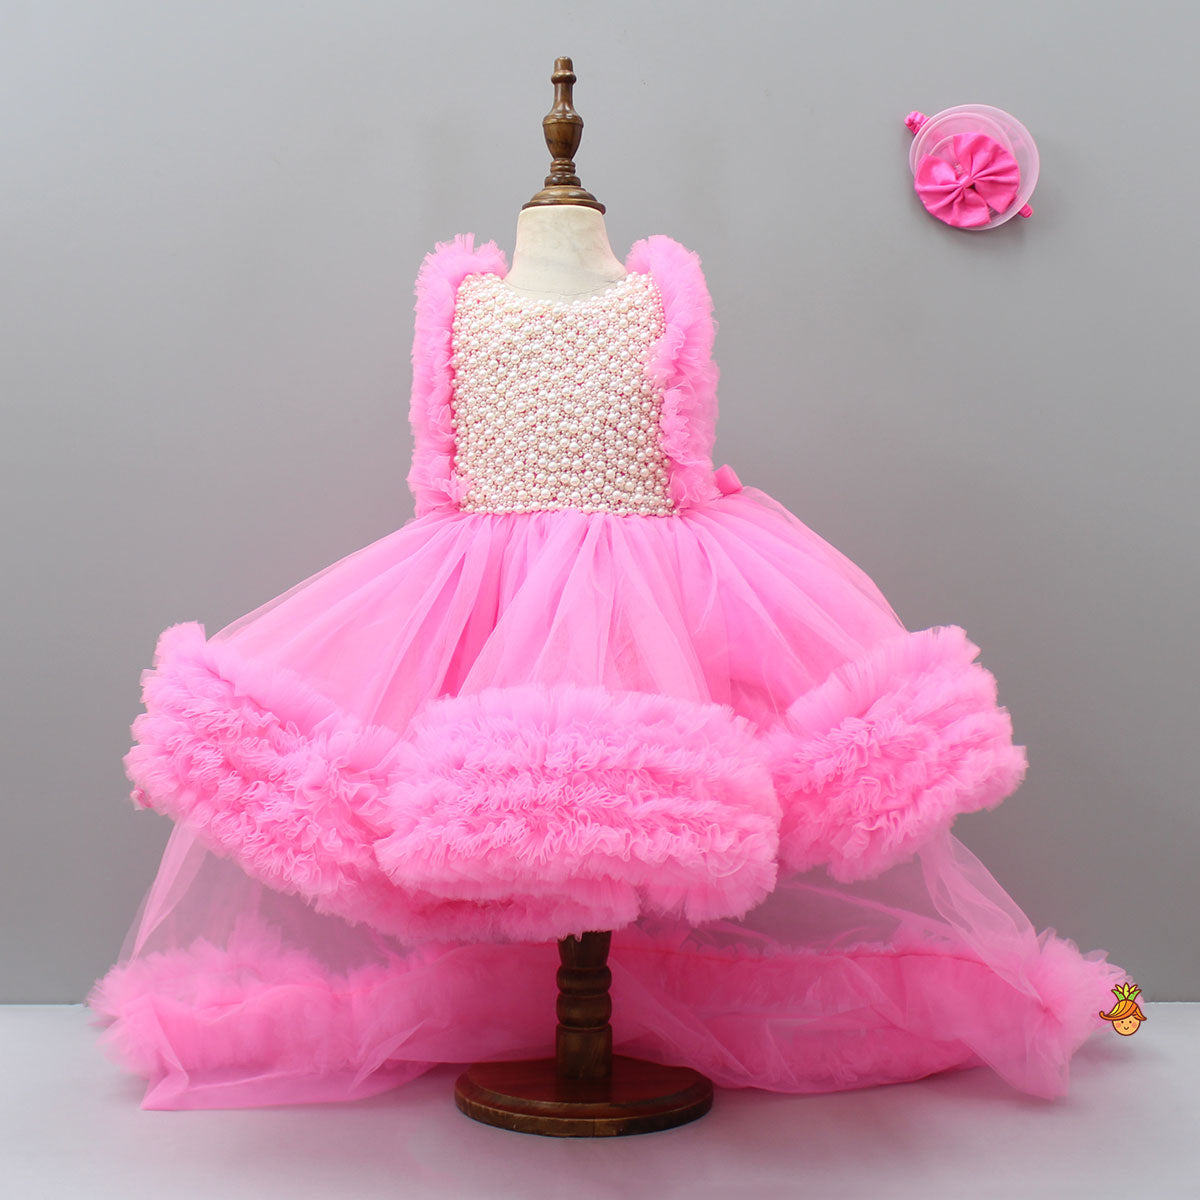 Glamorous Pink Frilled Dress With Detachable Trail And Head Band